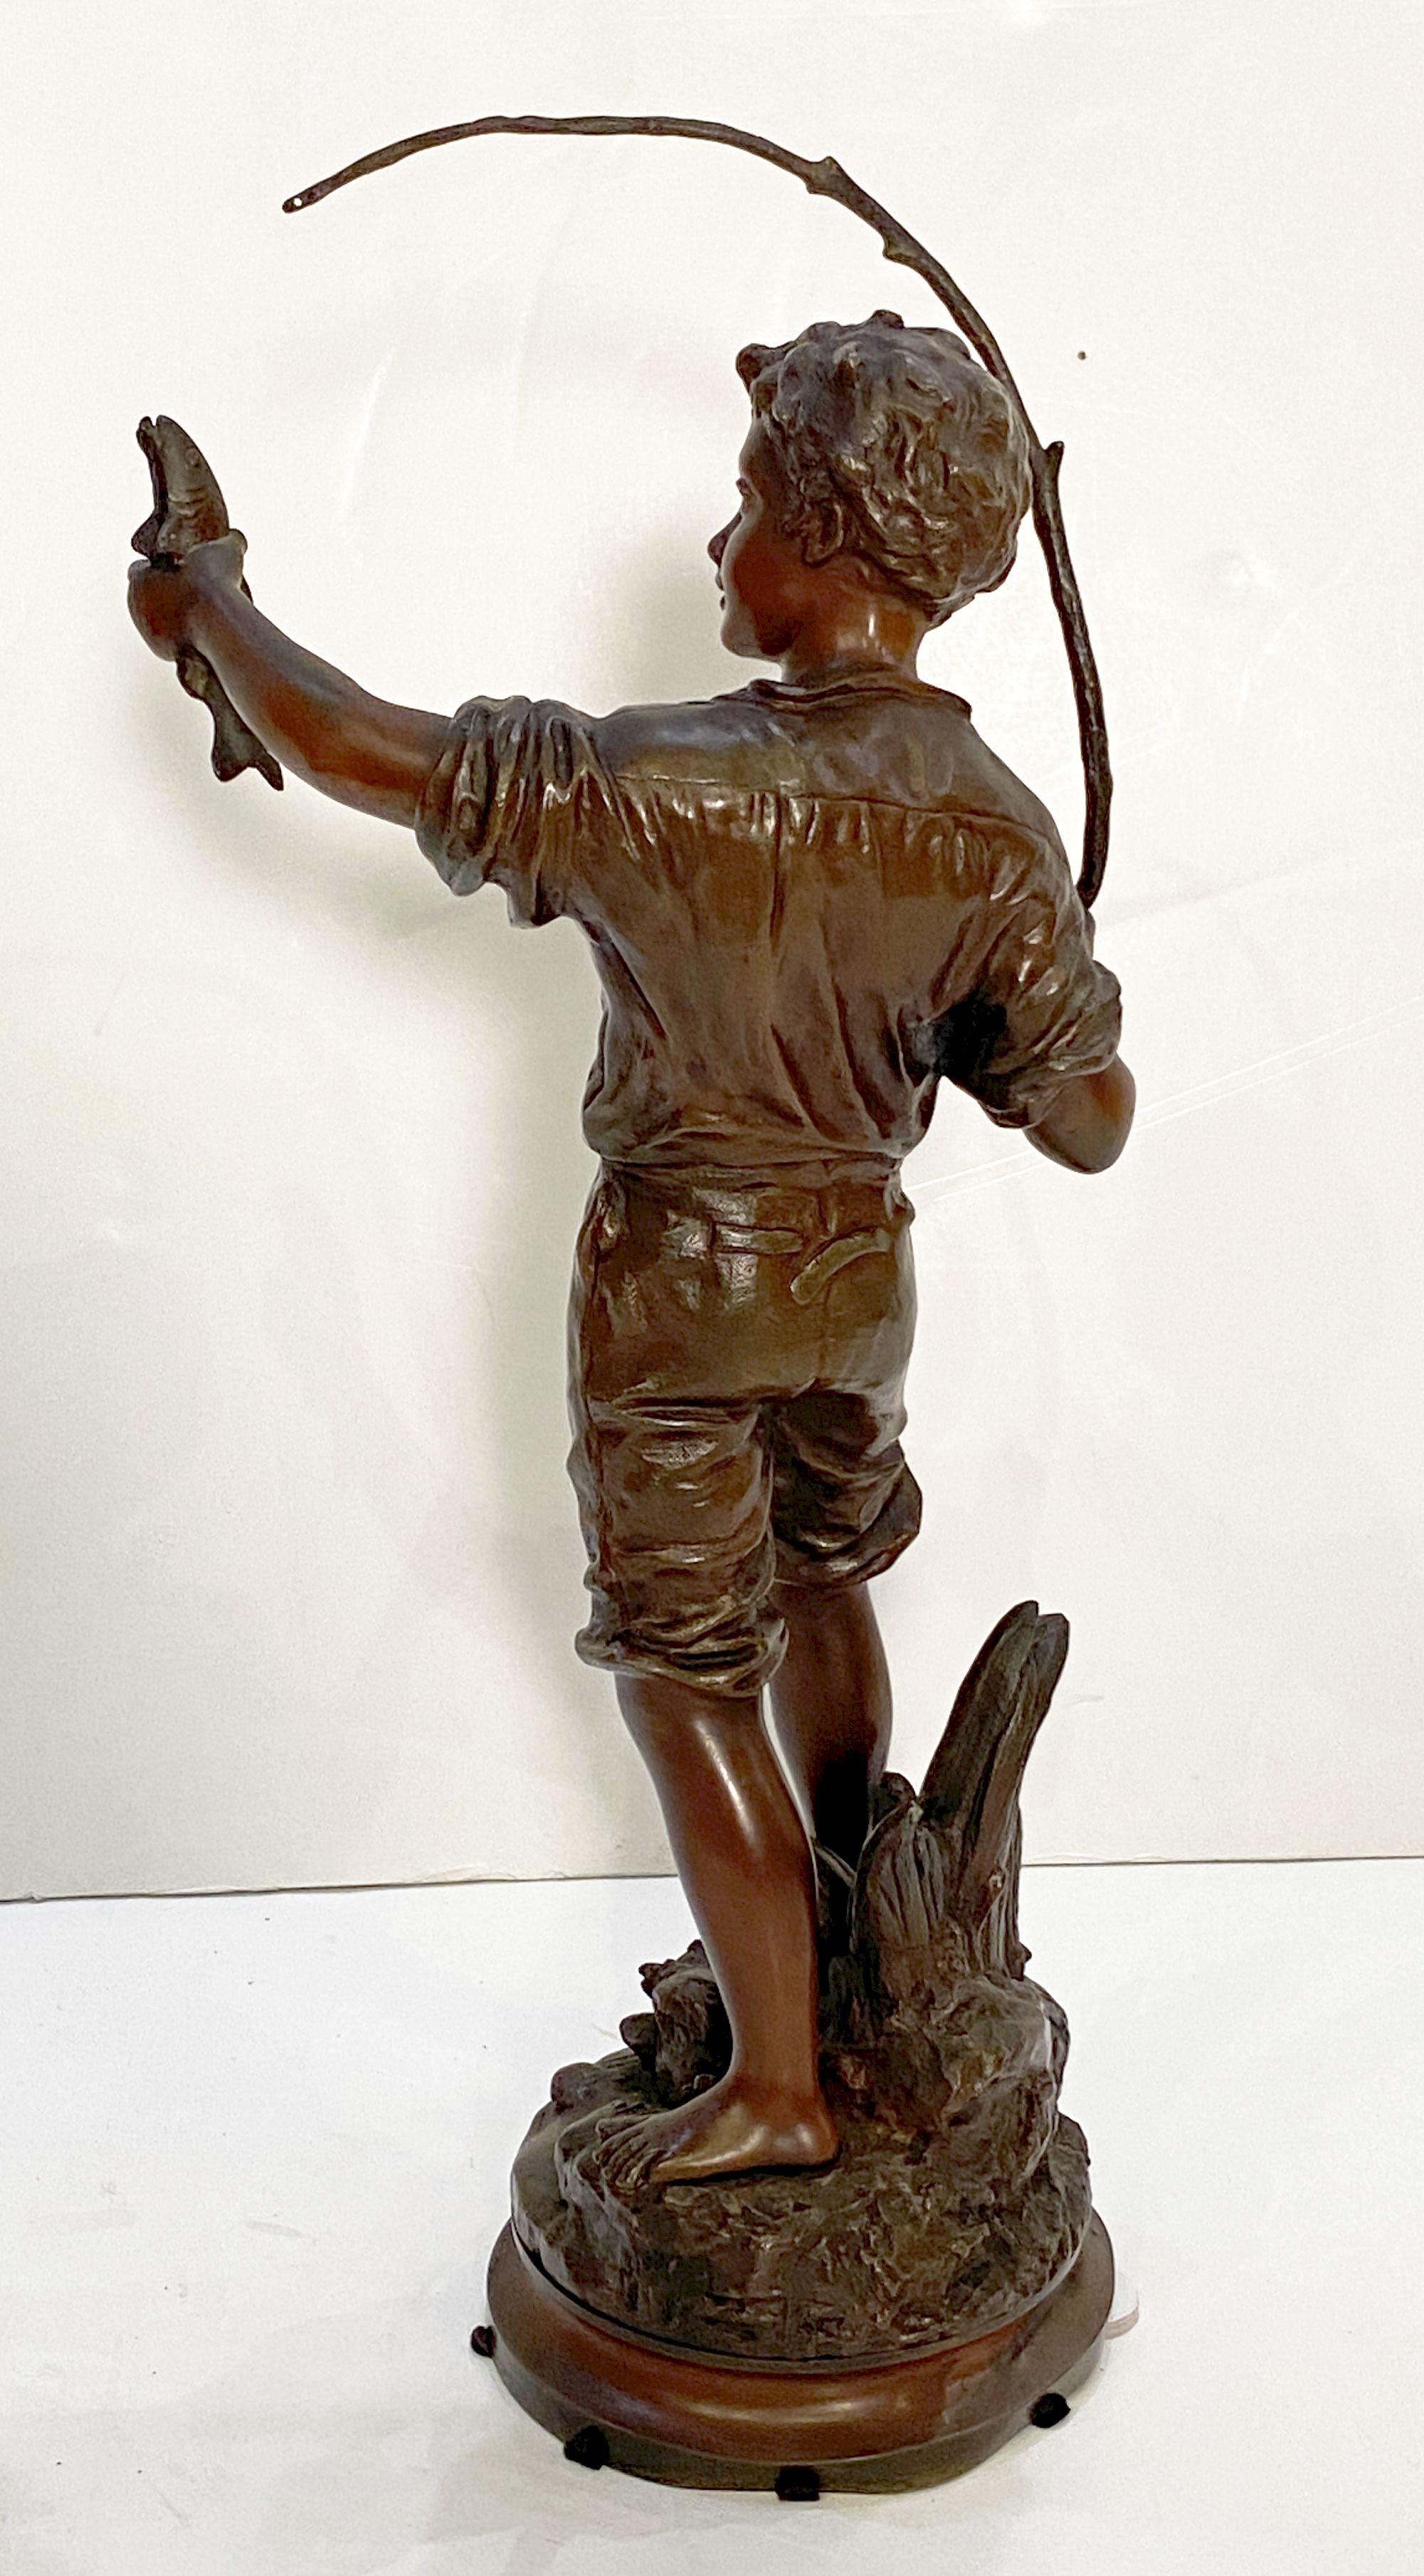 Heureux Pêcheur or Happy Fisherboy Bronze Sculptural Figure by Charles Anfrie  6